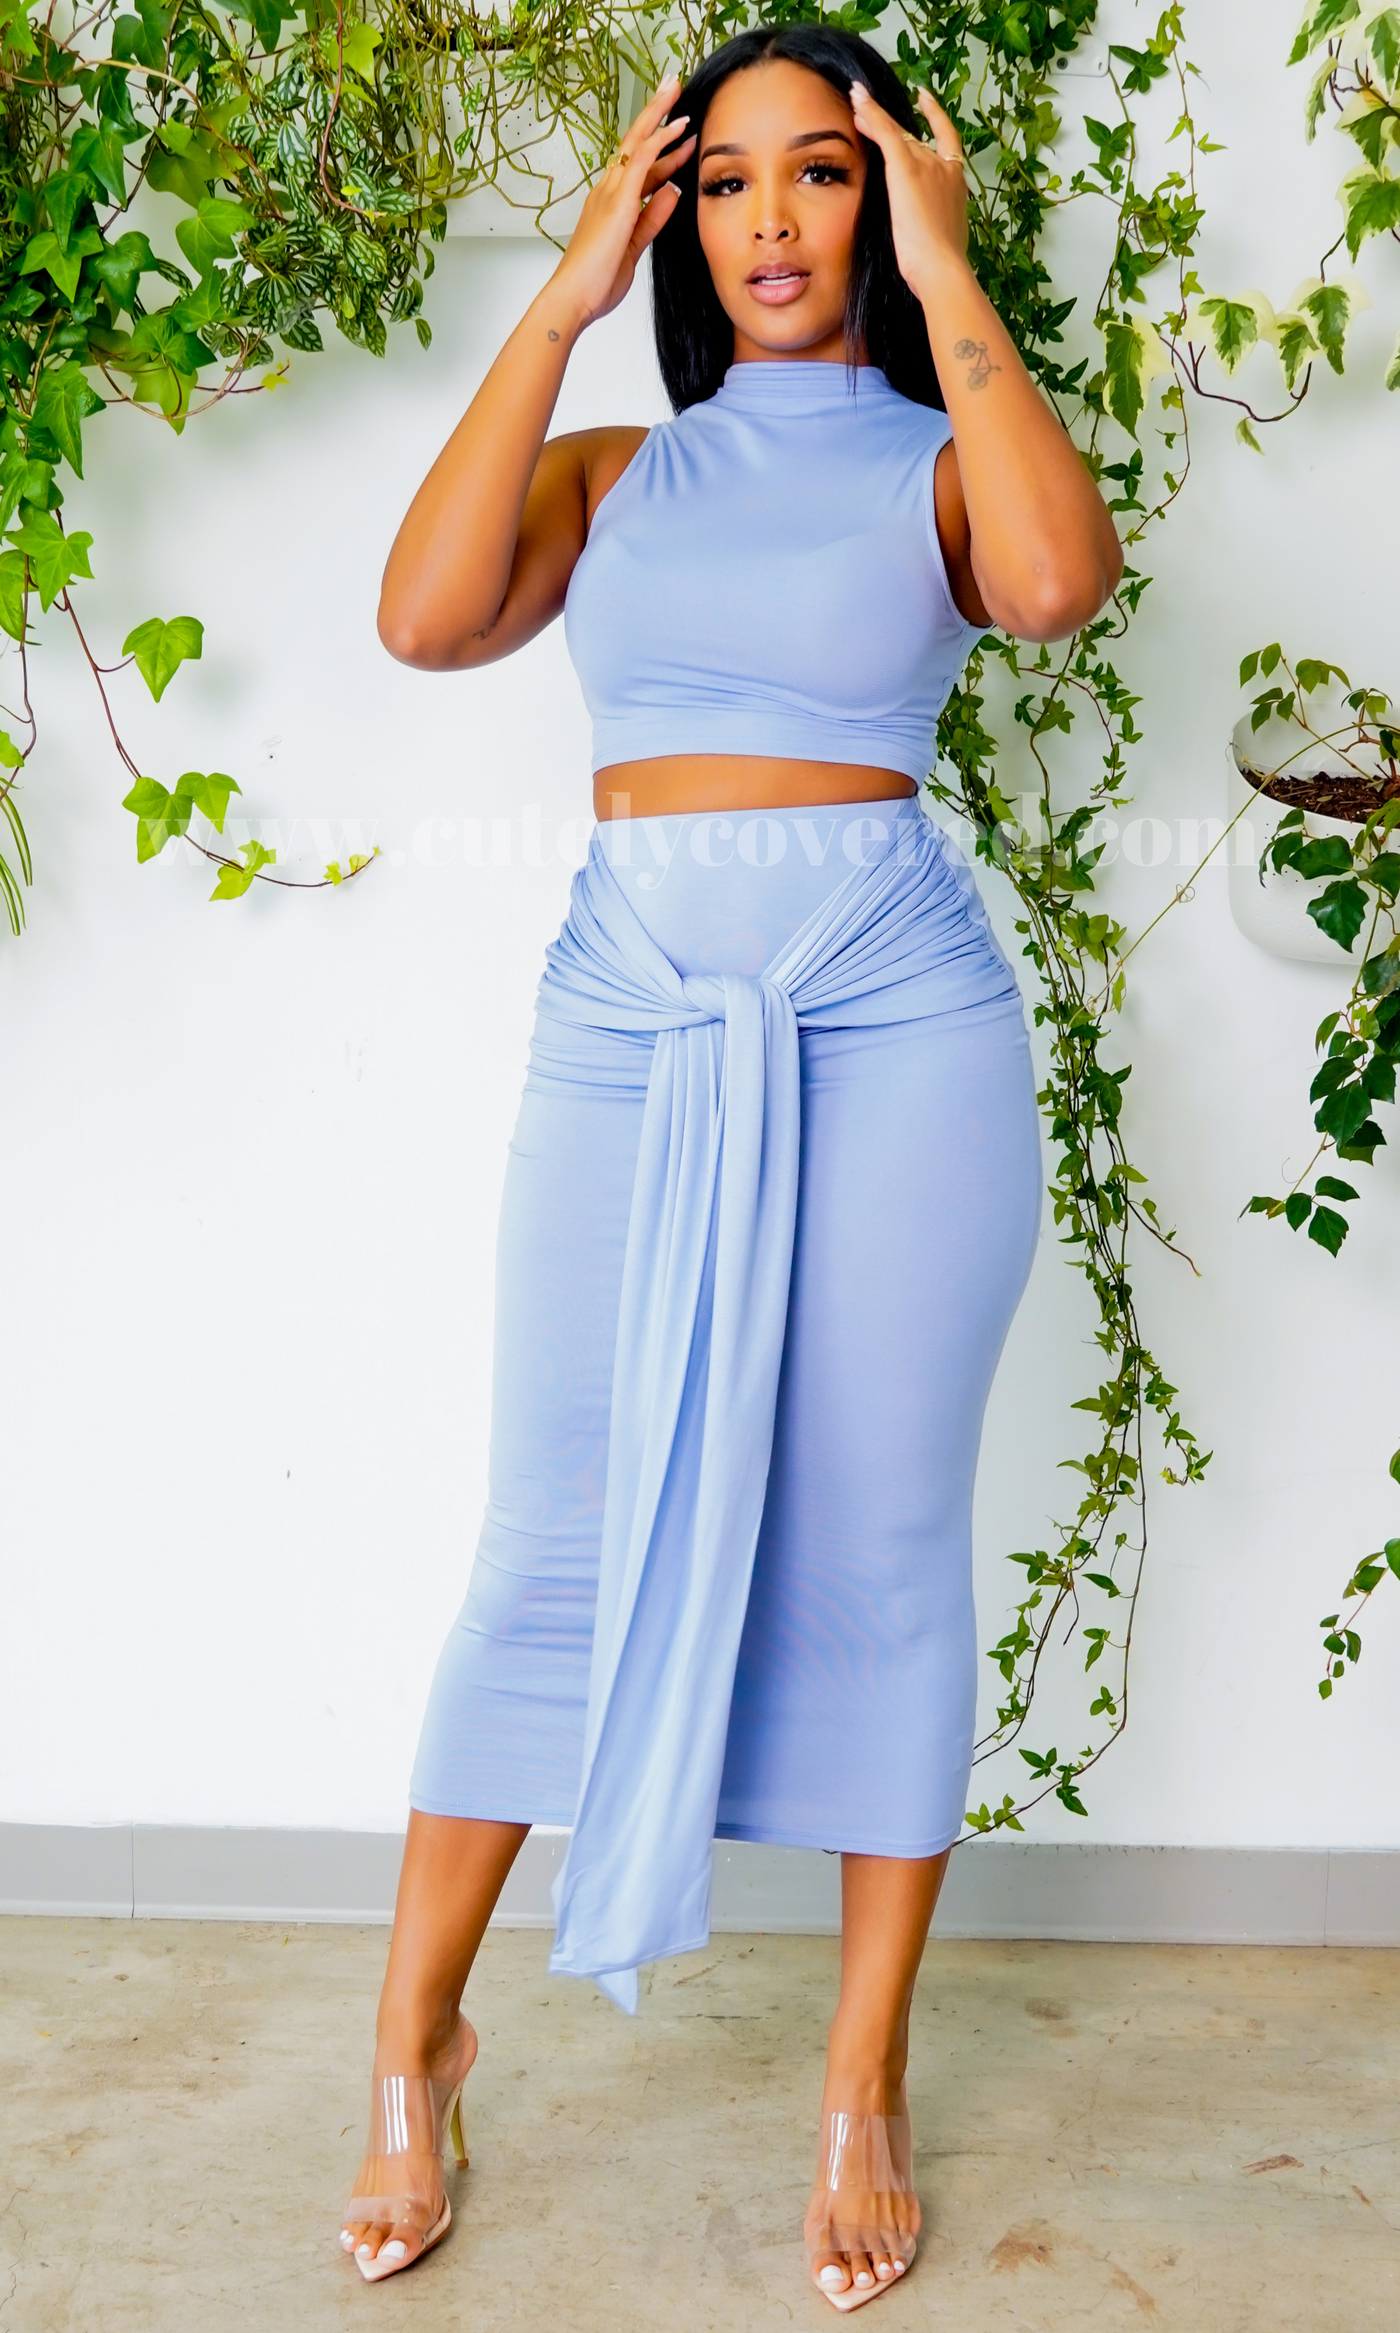 Tied Up|  Tie Front Skirt Set - Periwinkle Blue - Cutely Covered